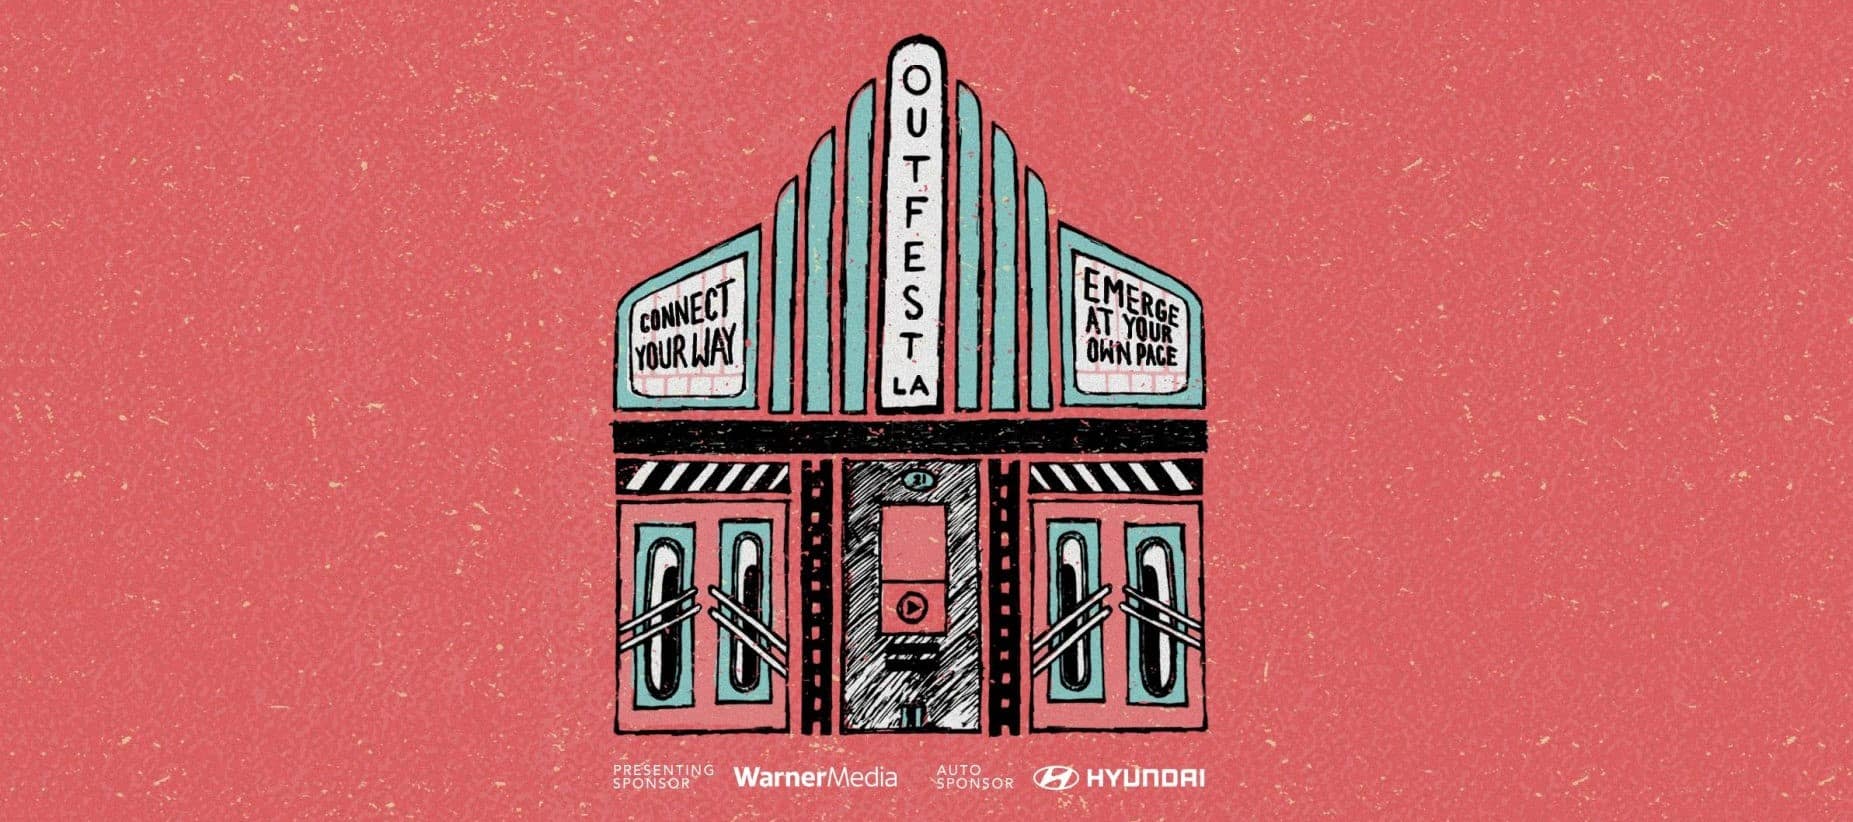 Hyundai is the Official Automotive Sponsor of the 2021 Outfest Los Angeles Film Festival for the Fourth Consecutive Year